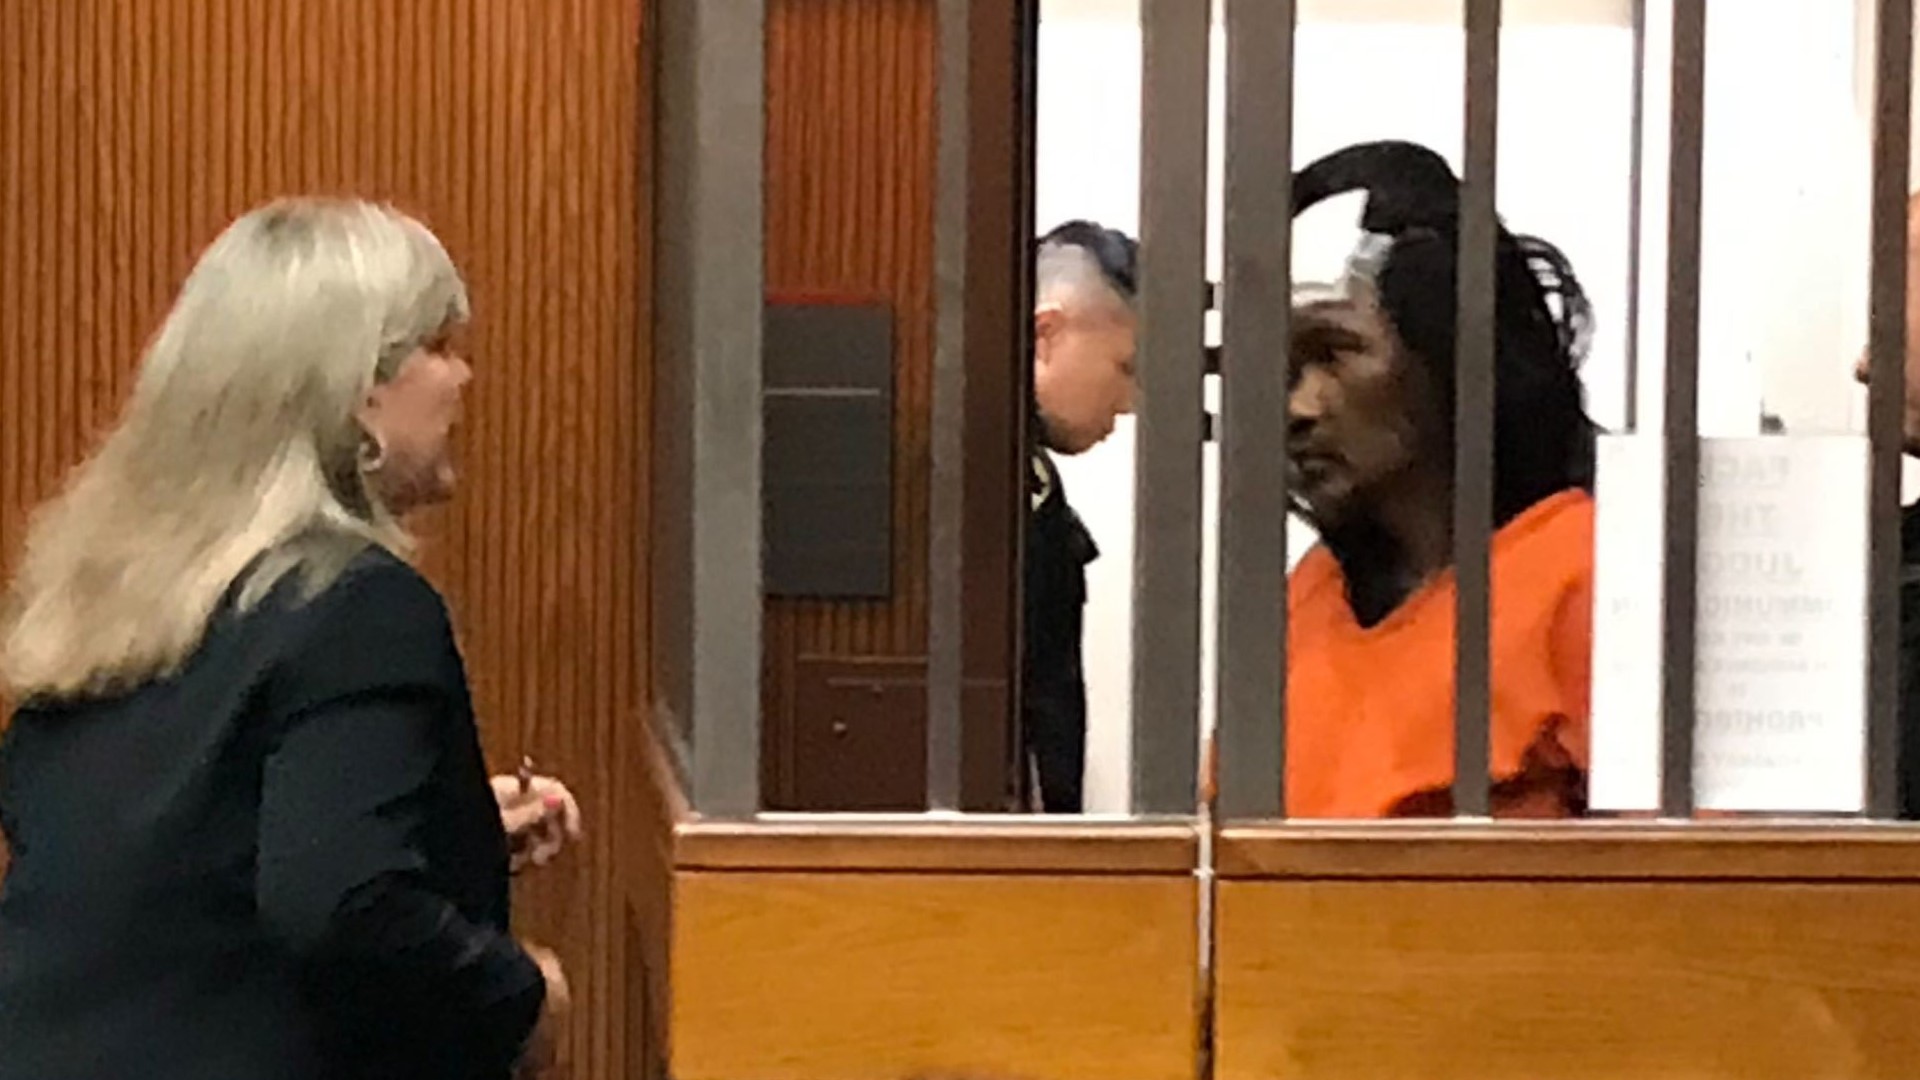 Adel Ramos, the man accused of killing Sacramento Police Officer Tara O'Sullivan, appears in court for the first time since the deadly shooting.